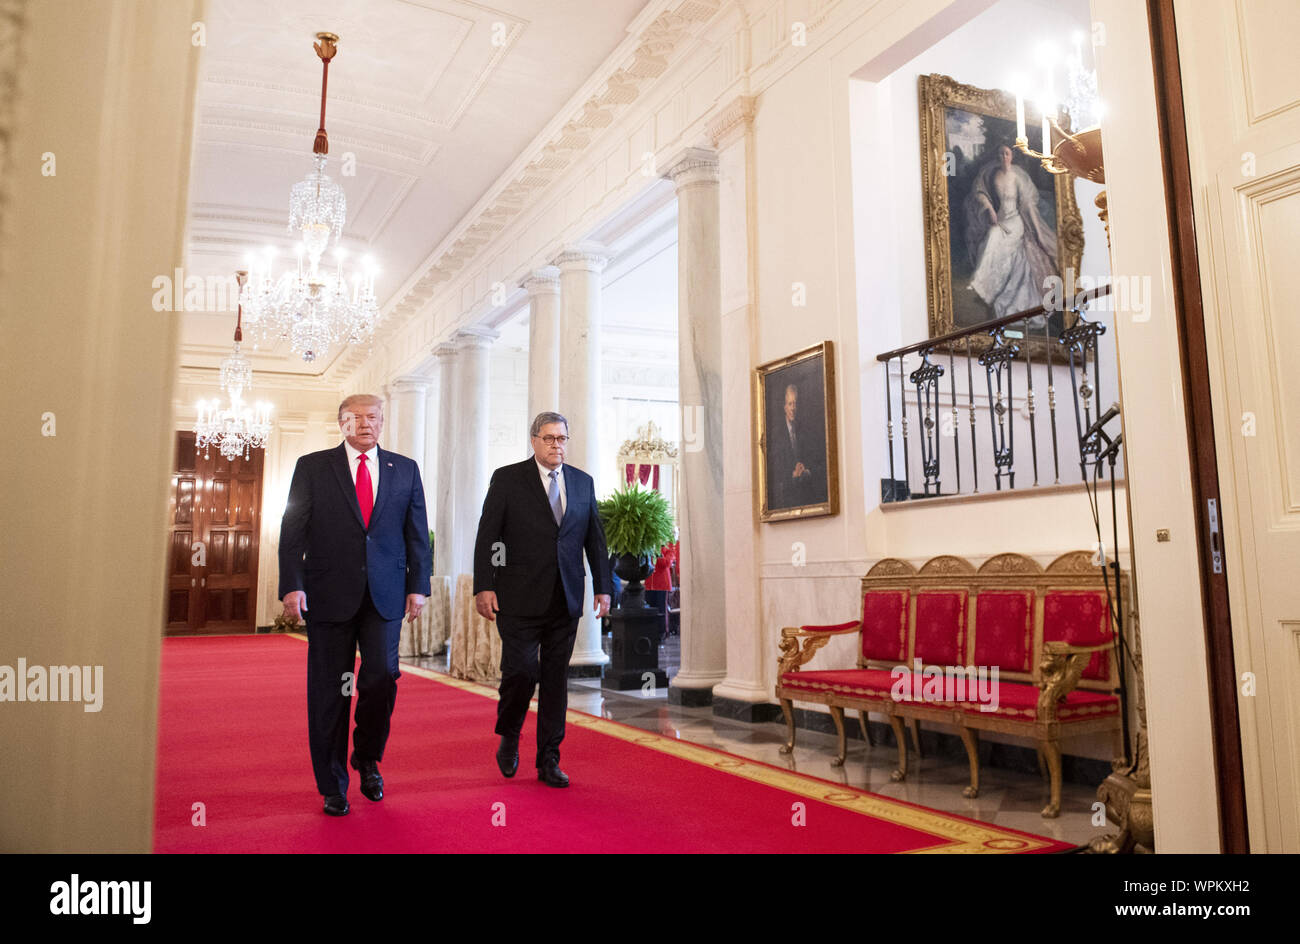 Washington, United States. 09th Sep, 2019. President Donald Trump (L) and Attorney General William Barr walk to the East Room to award the Public Safety Officer Medal of Valor and Heroic Commendations, at the White House in Washington, DC on Monday, September 9, 2019. Trump recognized the six Dayton officers who stoped a mass shooting on August 4th and also honored 5 civilians who helped during a mass shooting at a Walmart in El Paso a day earlier. Photo by Kevin Dietsch/UPI Credit: UPI/Alamy Live News Stock Photo